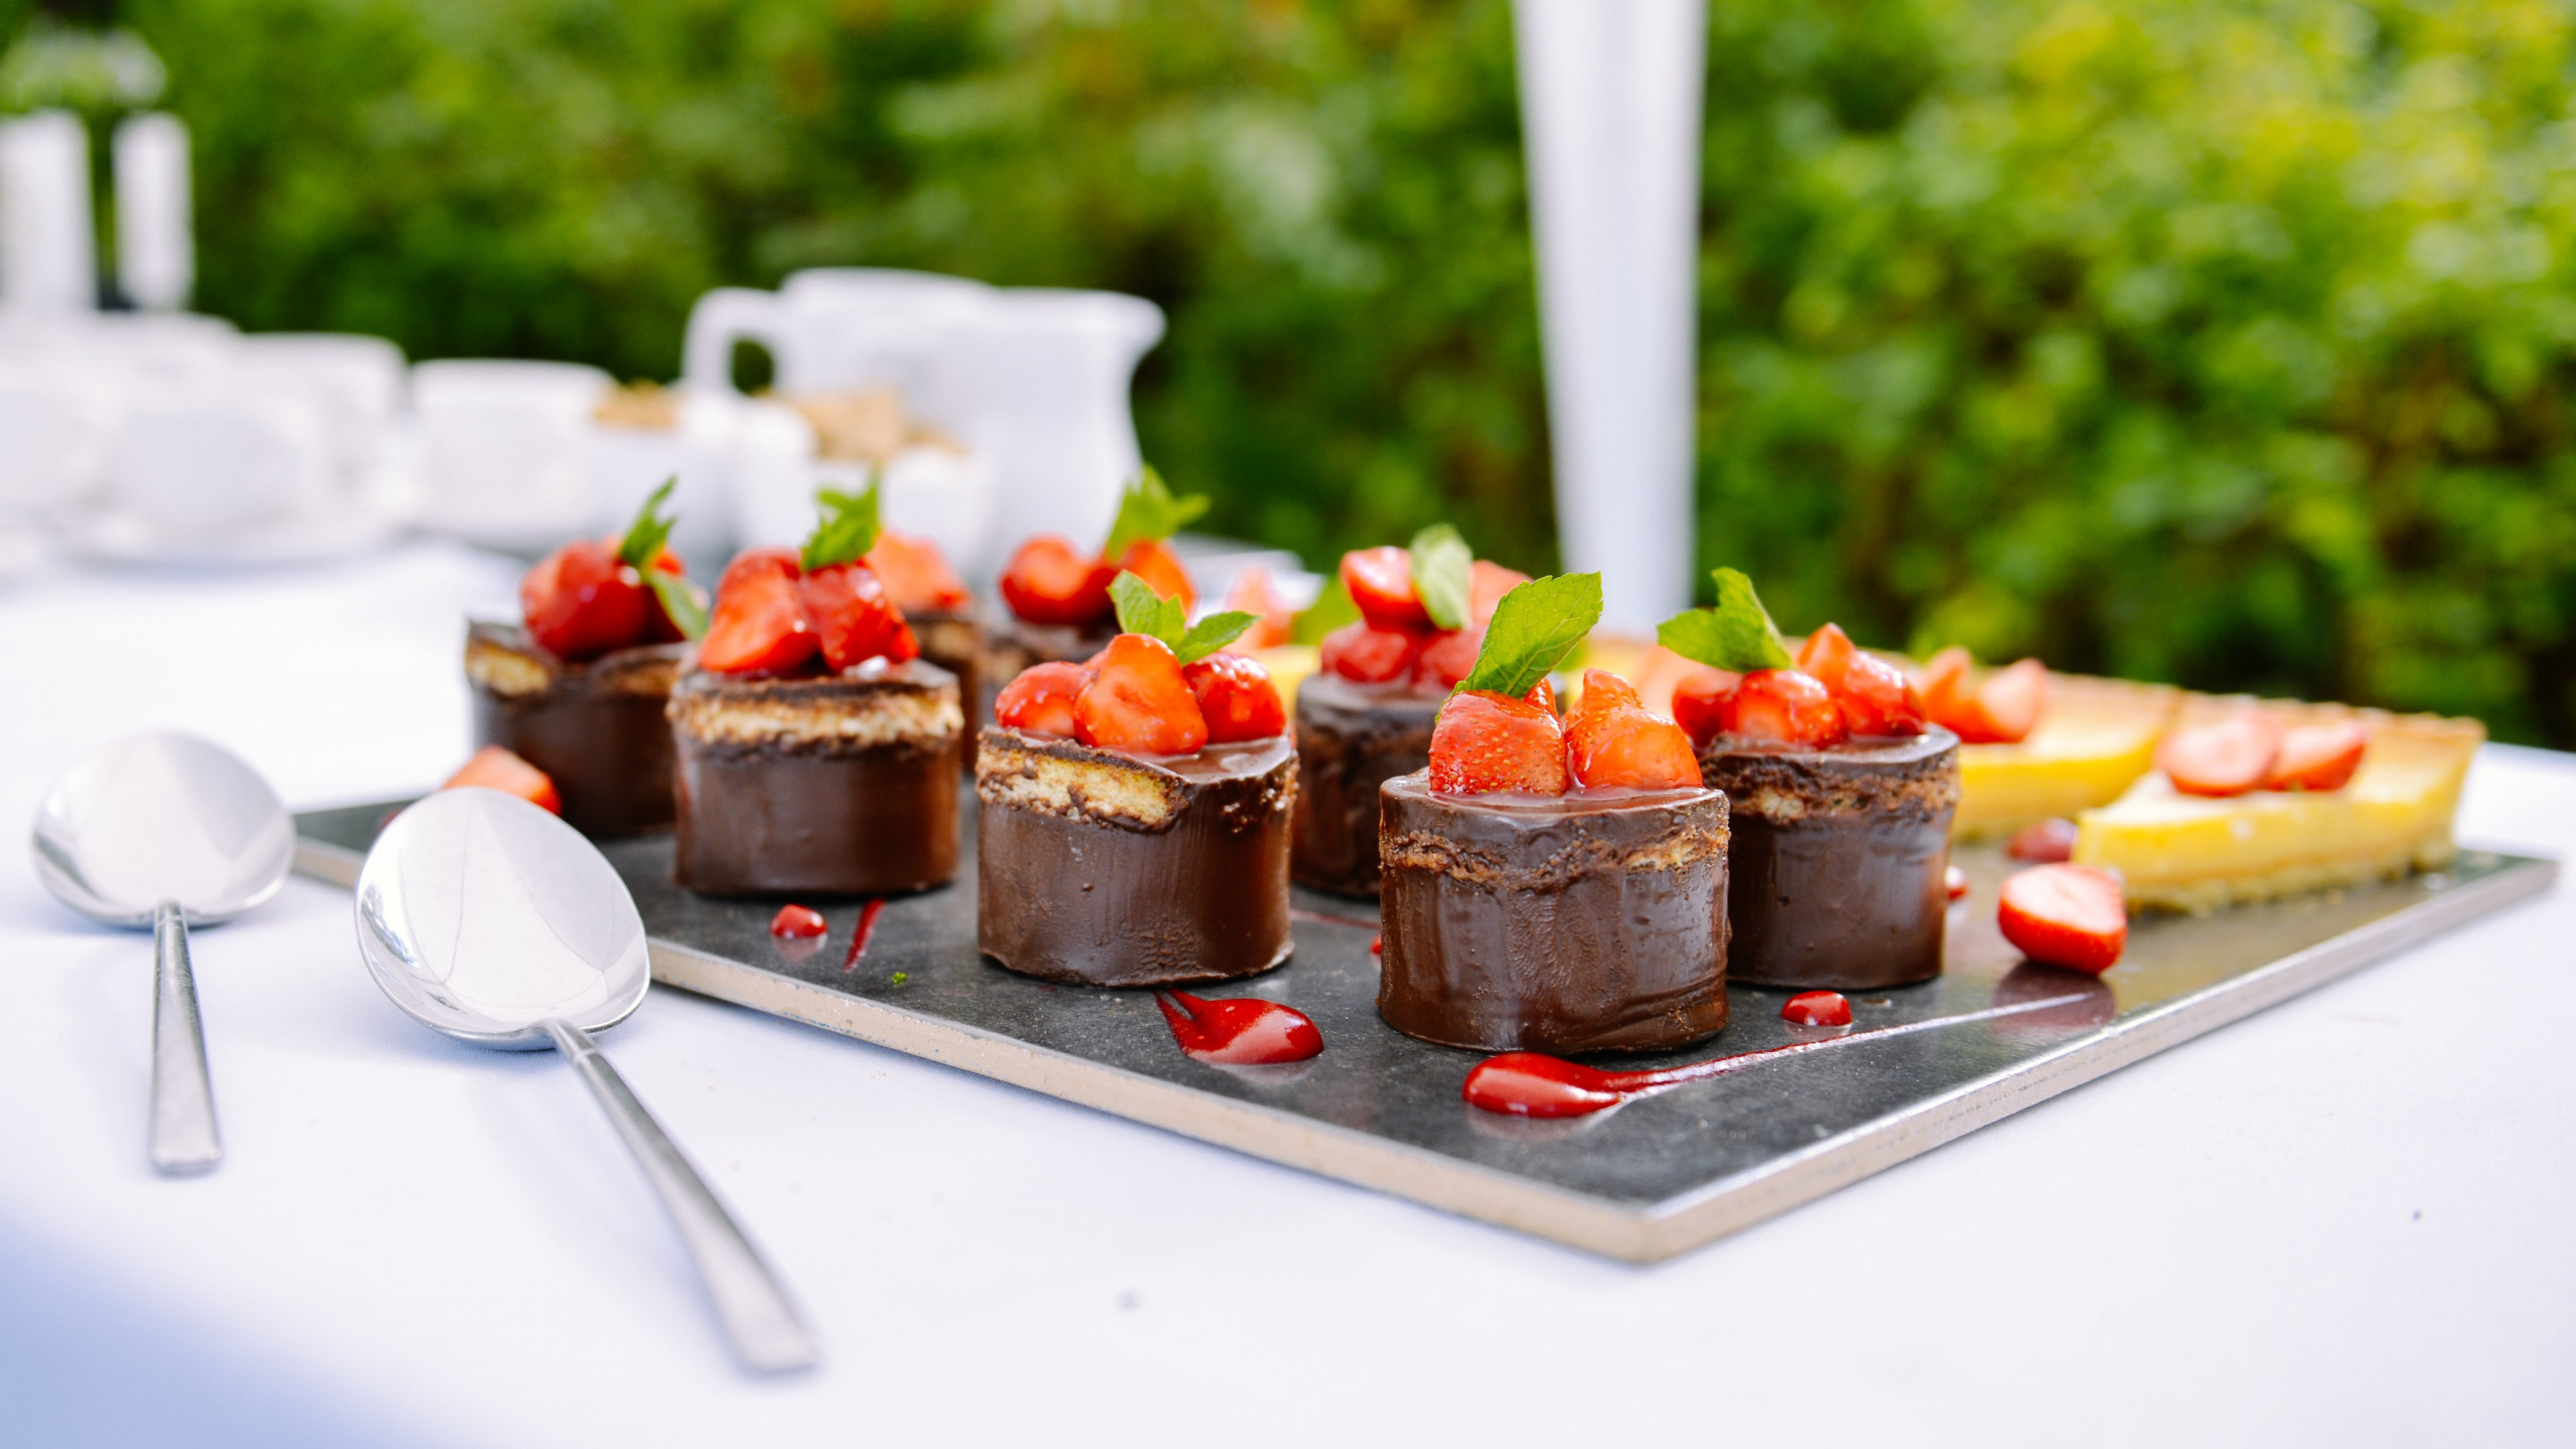 Chocolate cakes with strawberries wallpaper 2880x1620